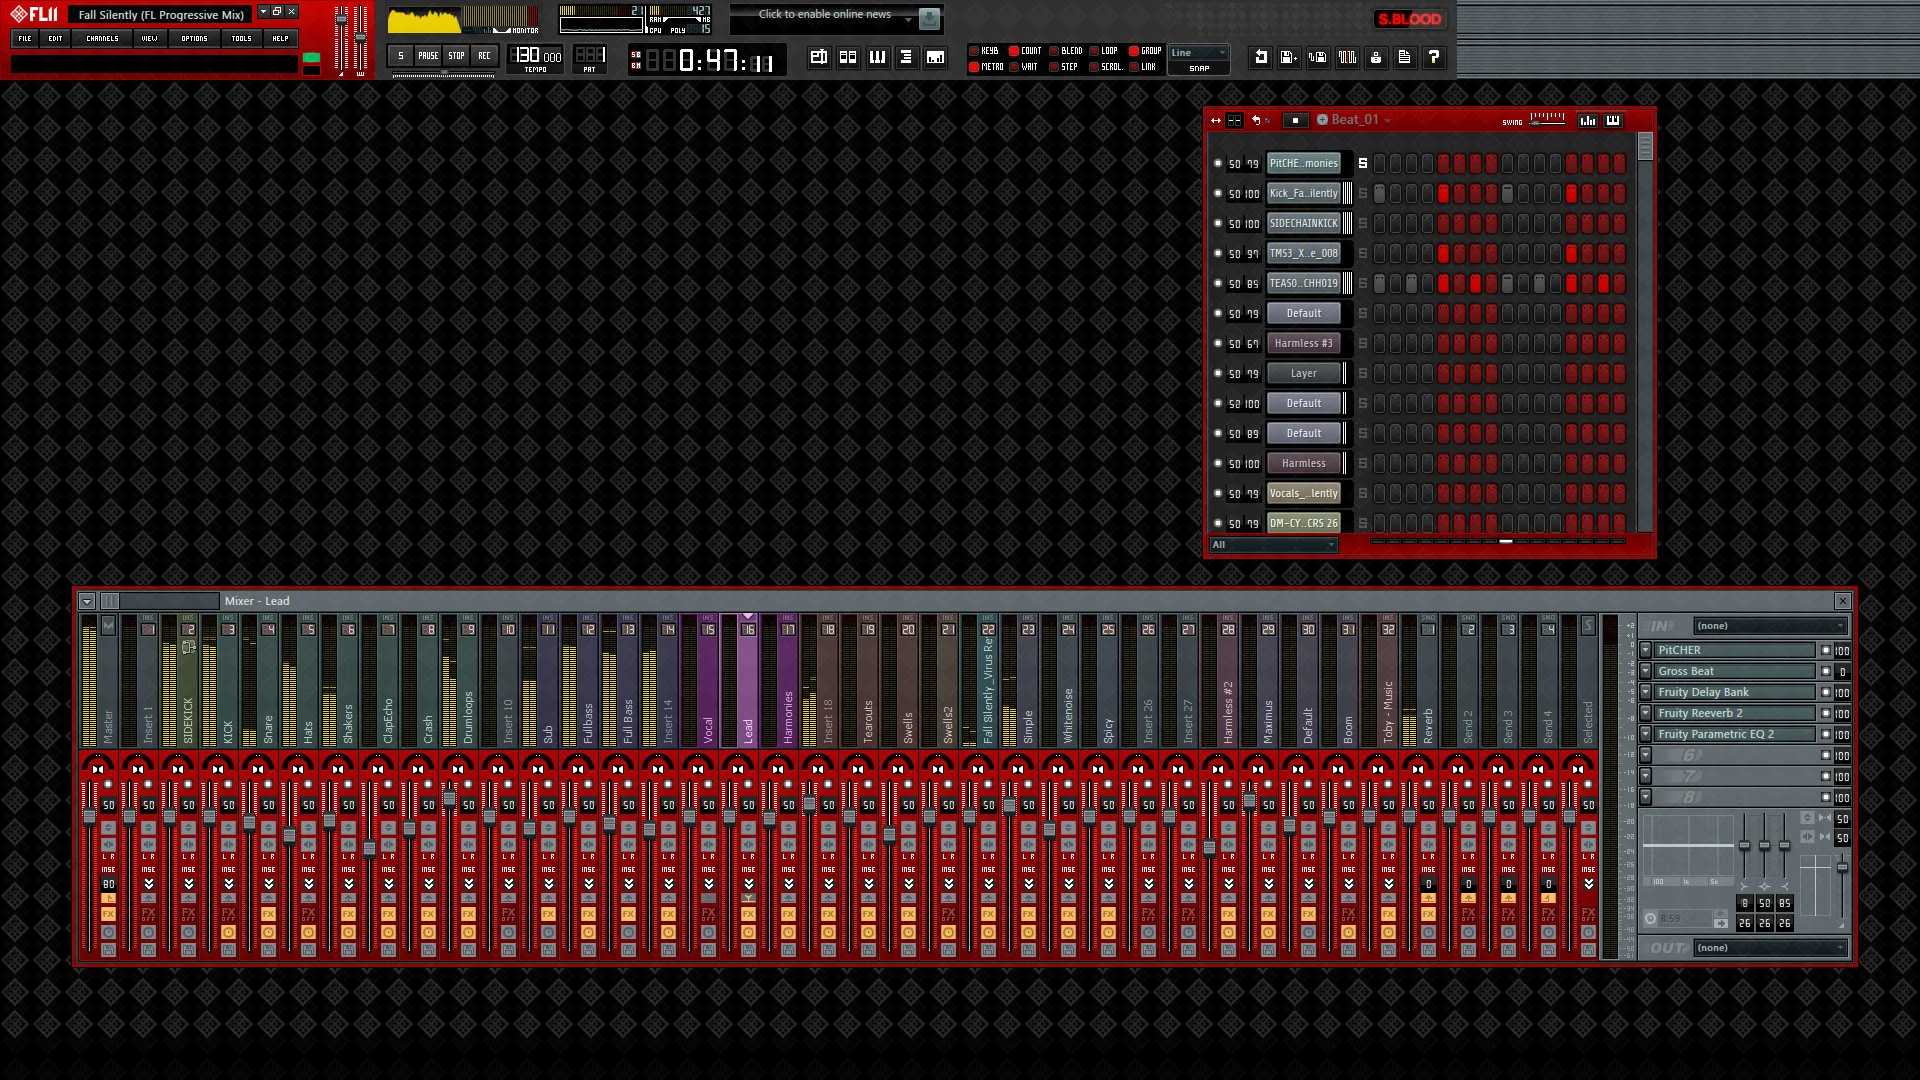 FL Studio 11 Skin ( S.BLOOD ) By JGFX Download Free Now : http